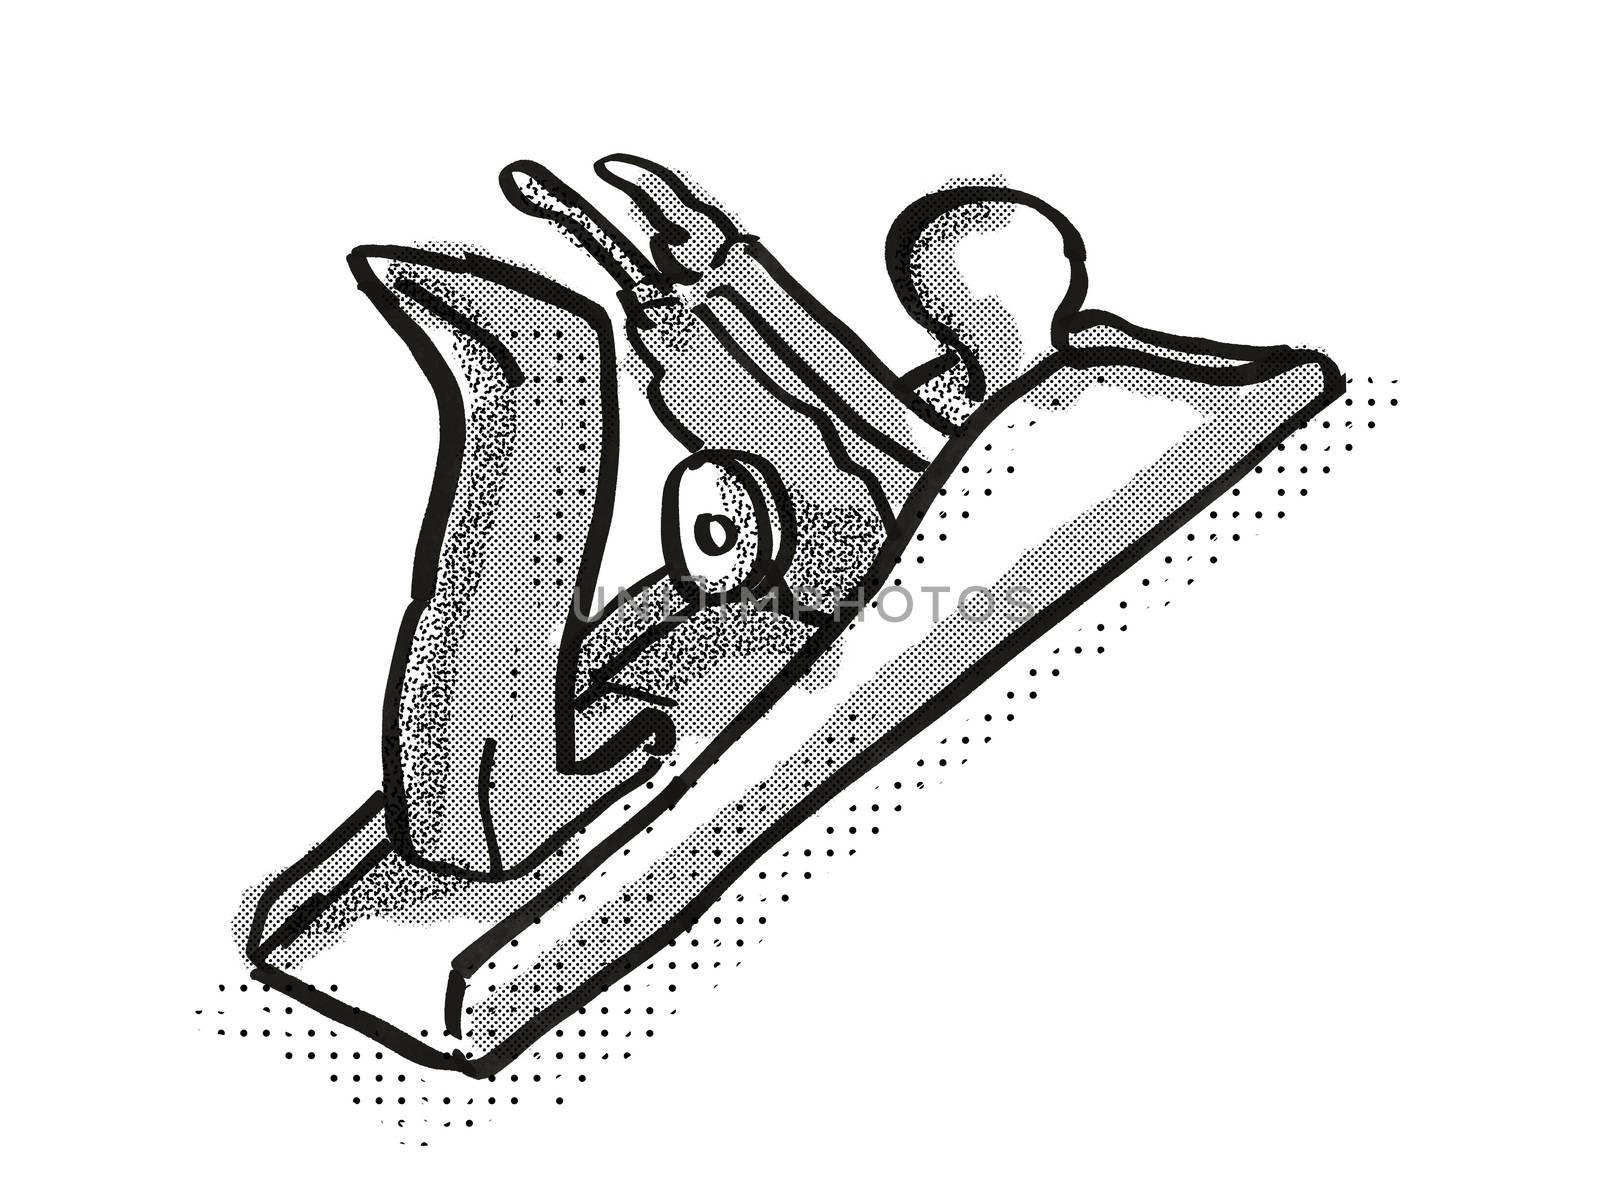 Retro cartoon style drawing of a wood smoothing plane , a woodworking hand tool  on isolated white background done in black and white